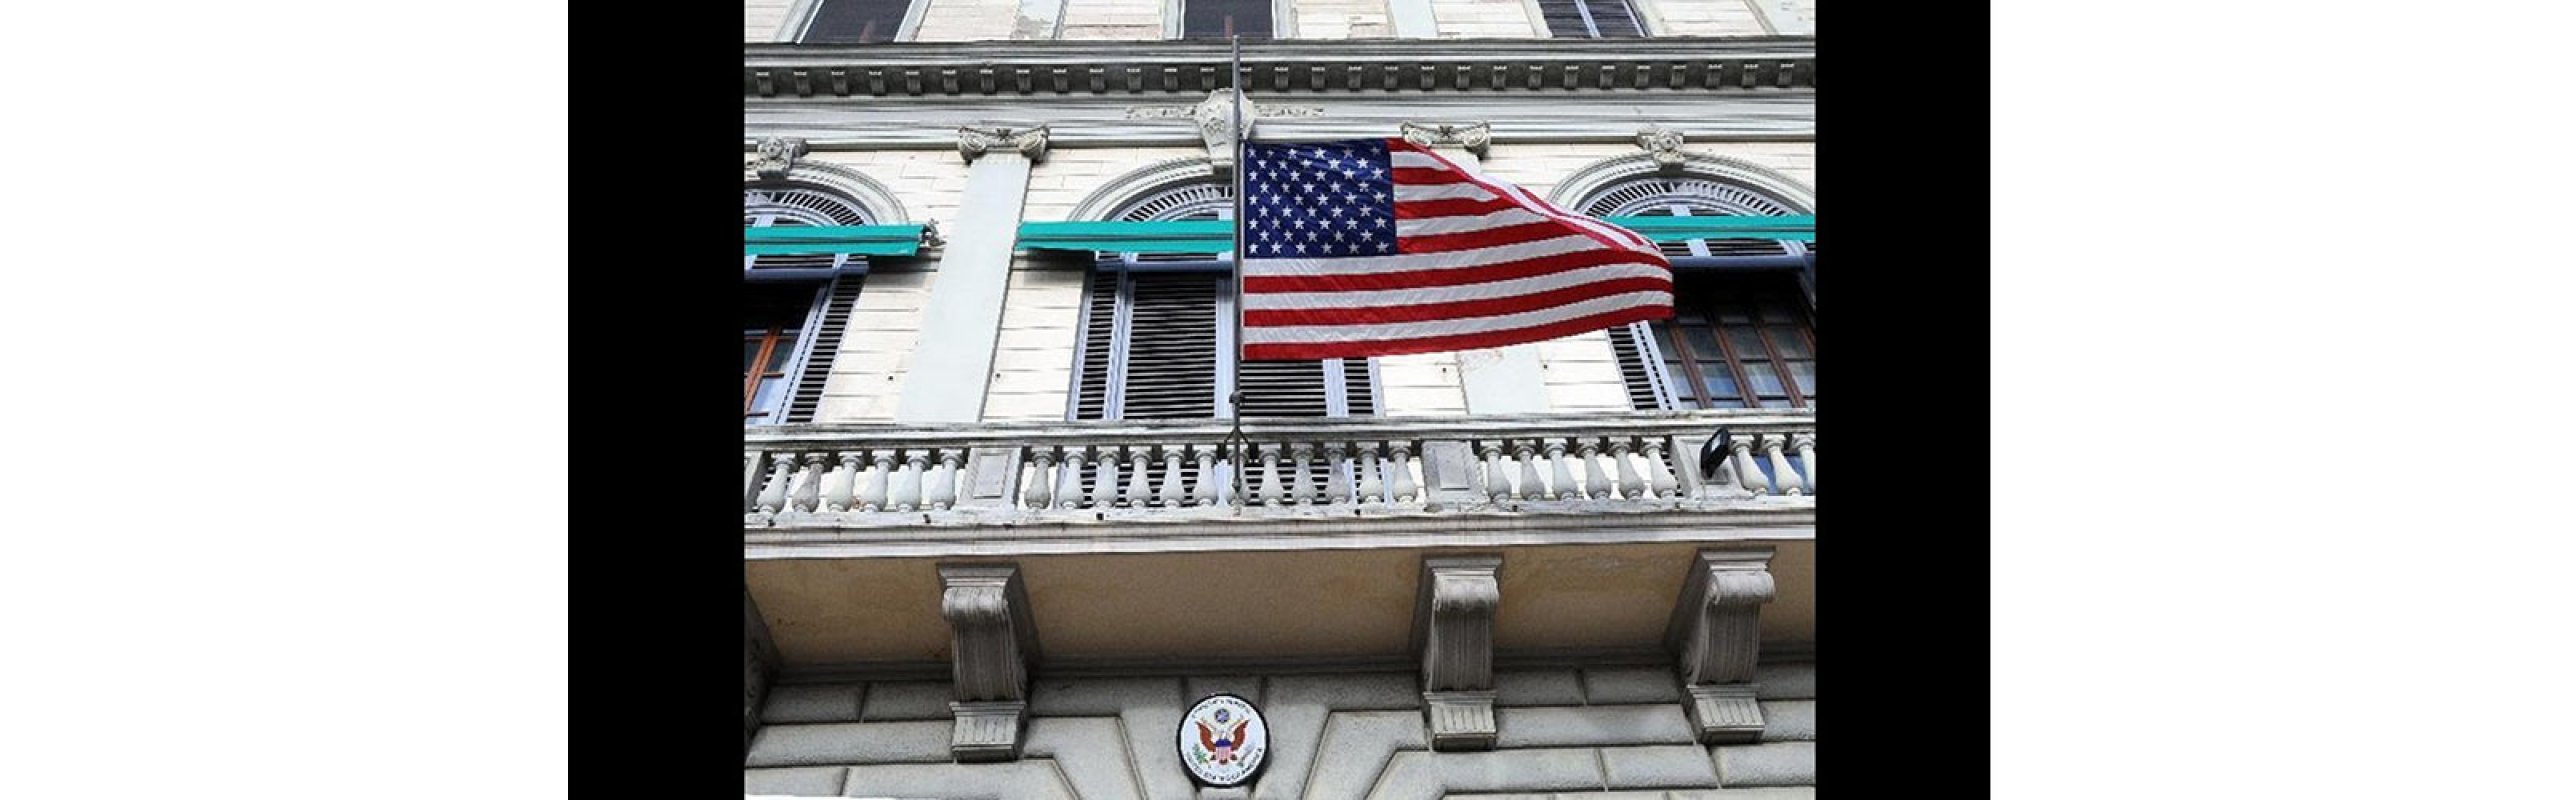 Insieme 200: celebrating 200 years of US diplomatic presence in Florence